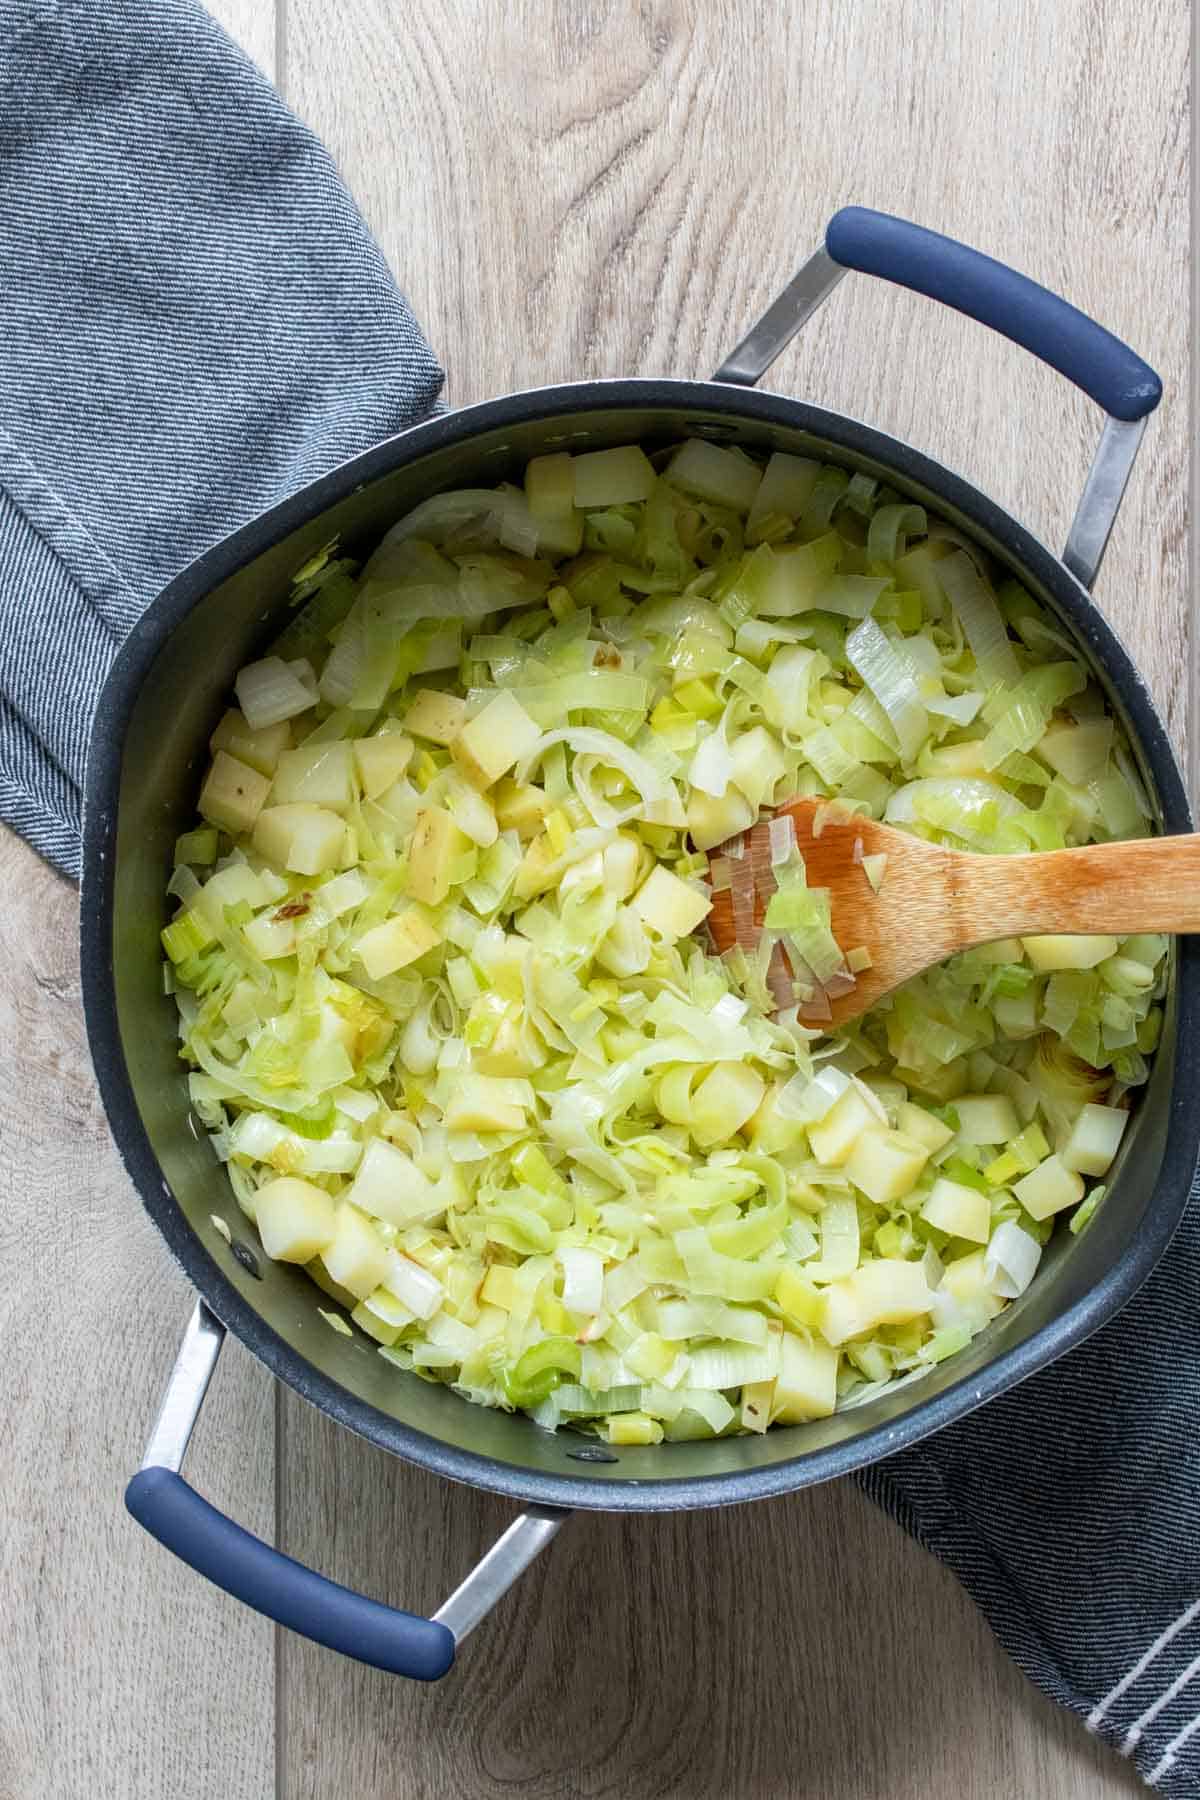 Wooden spoon mixing chopped leeks and potatoes in a black pot on a wooden surface